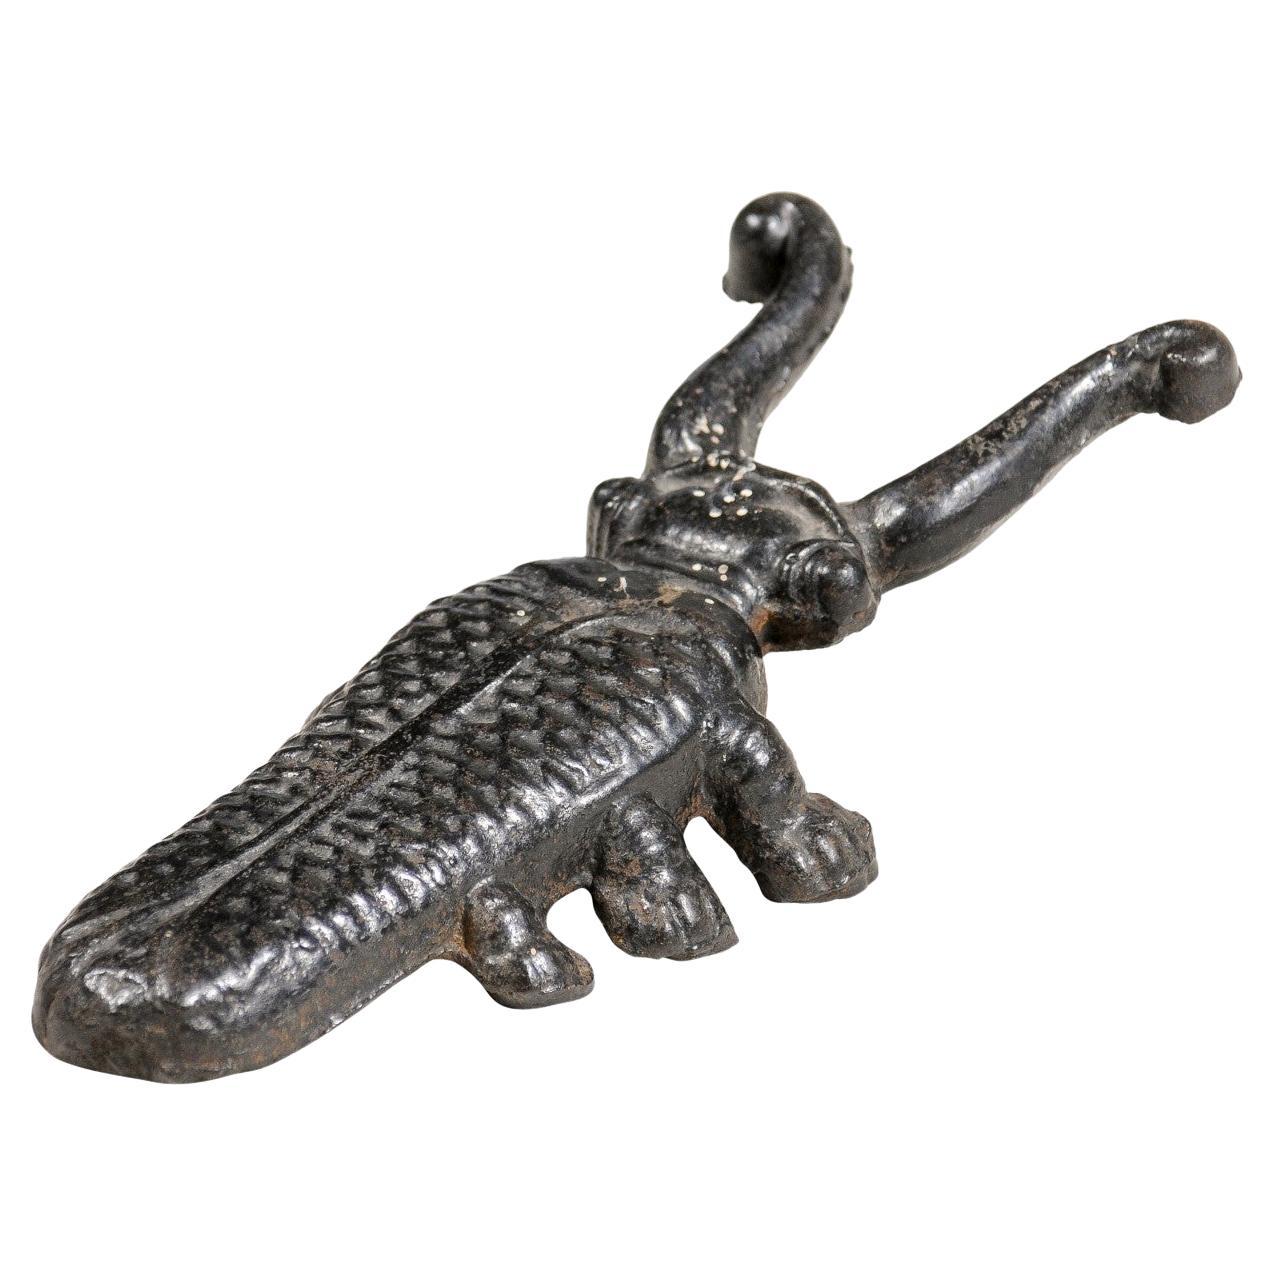 19th Century English Victorian Iron Bootjack Depicting a Cricket with Antennae